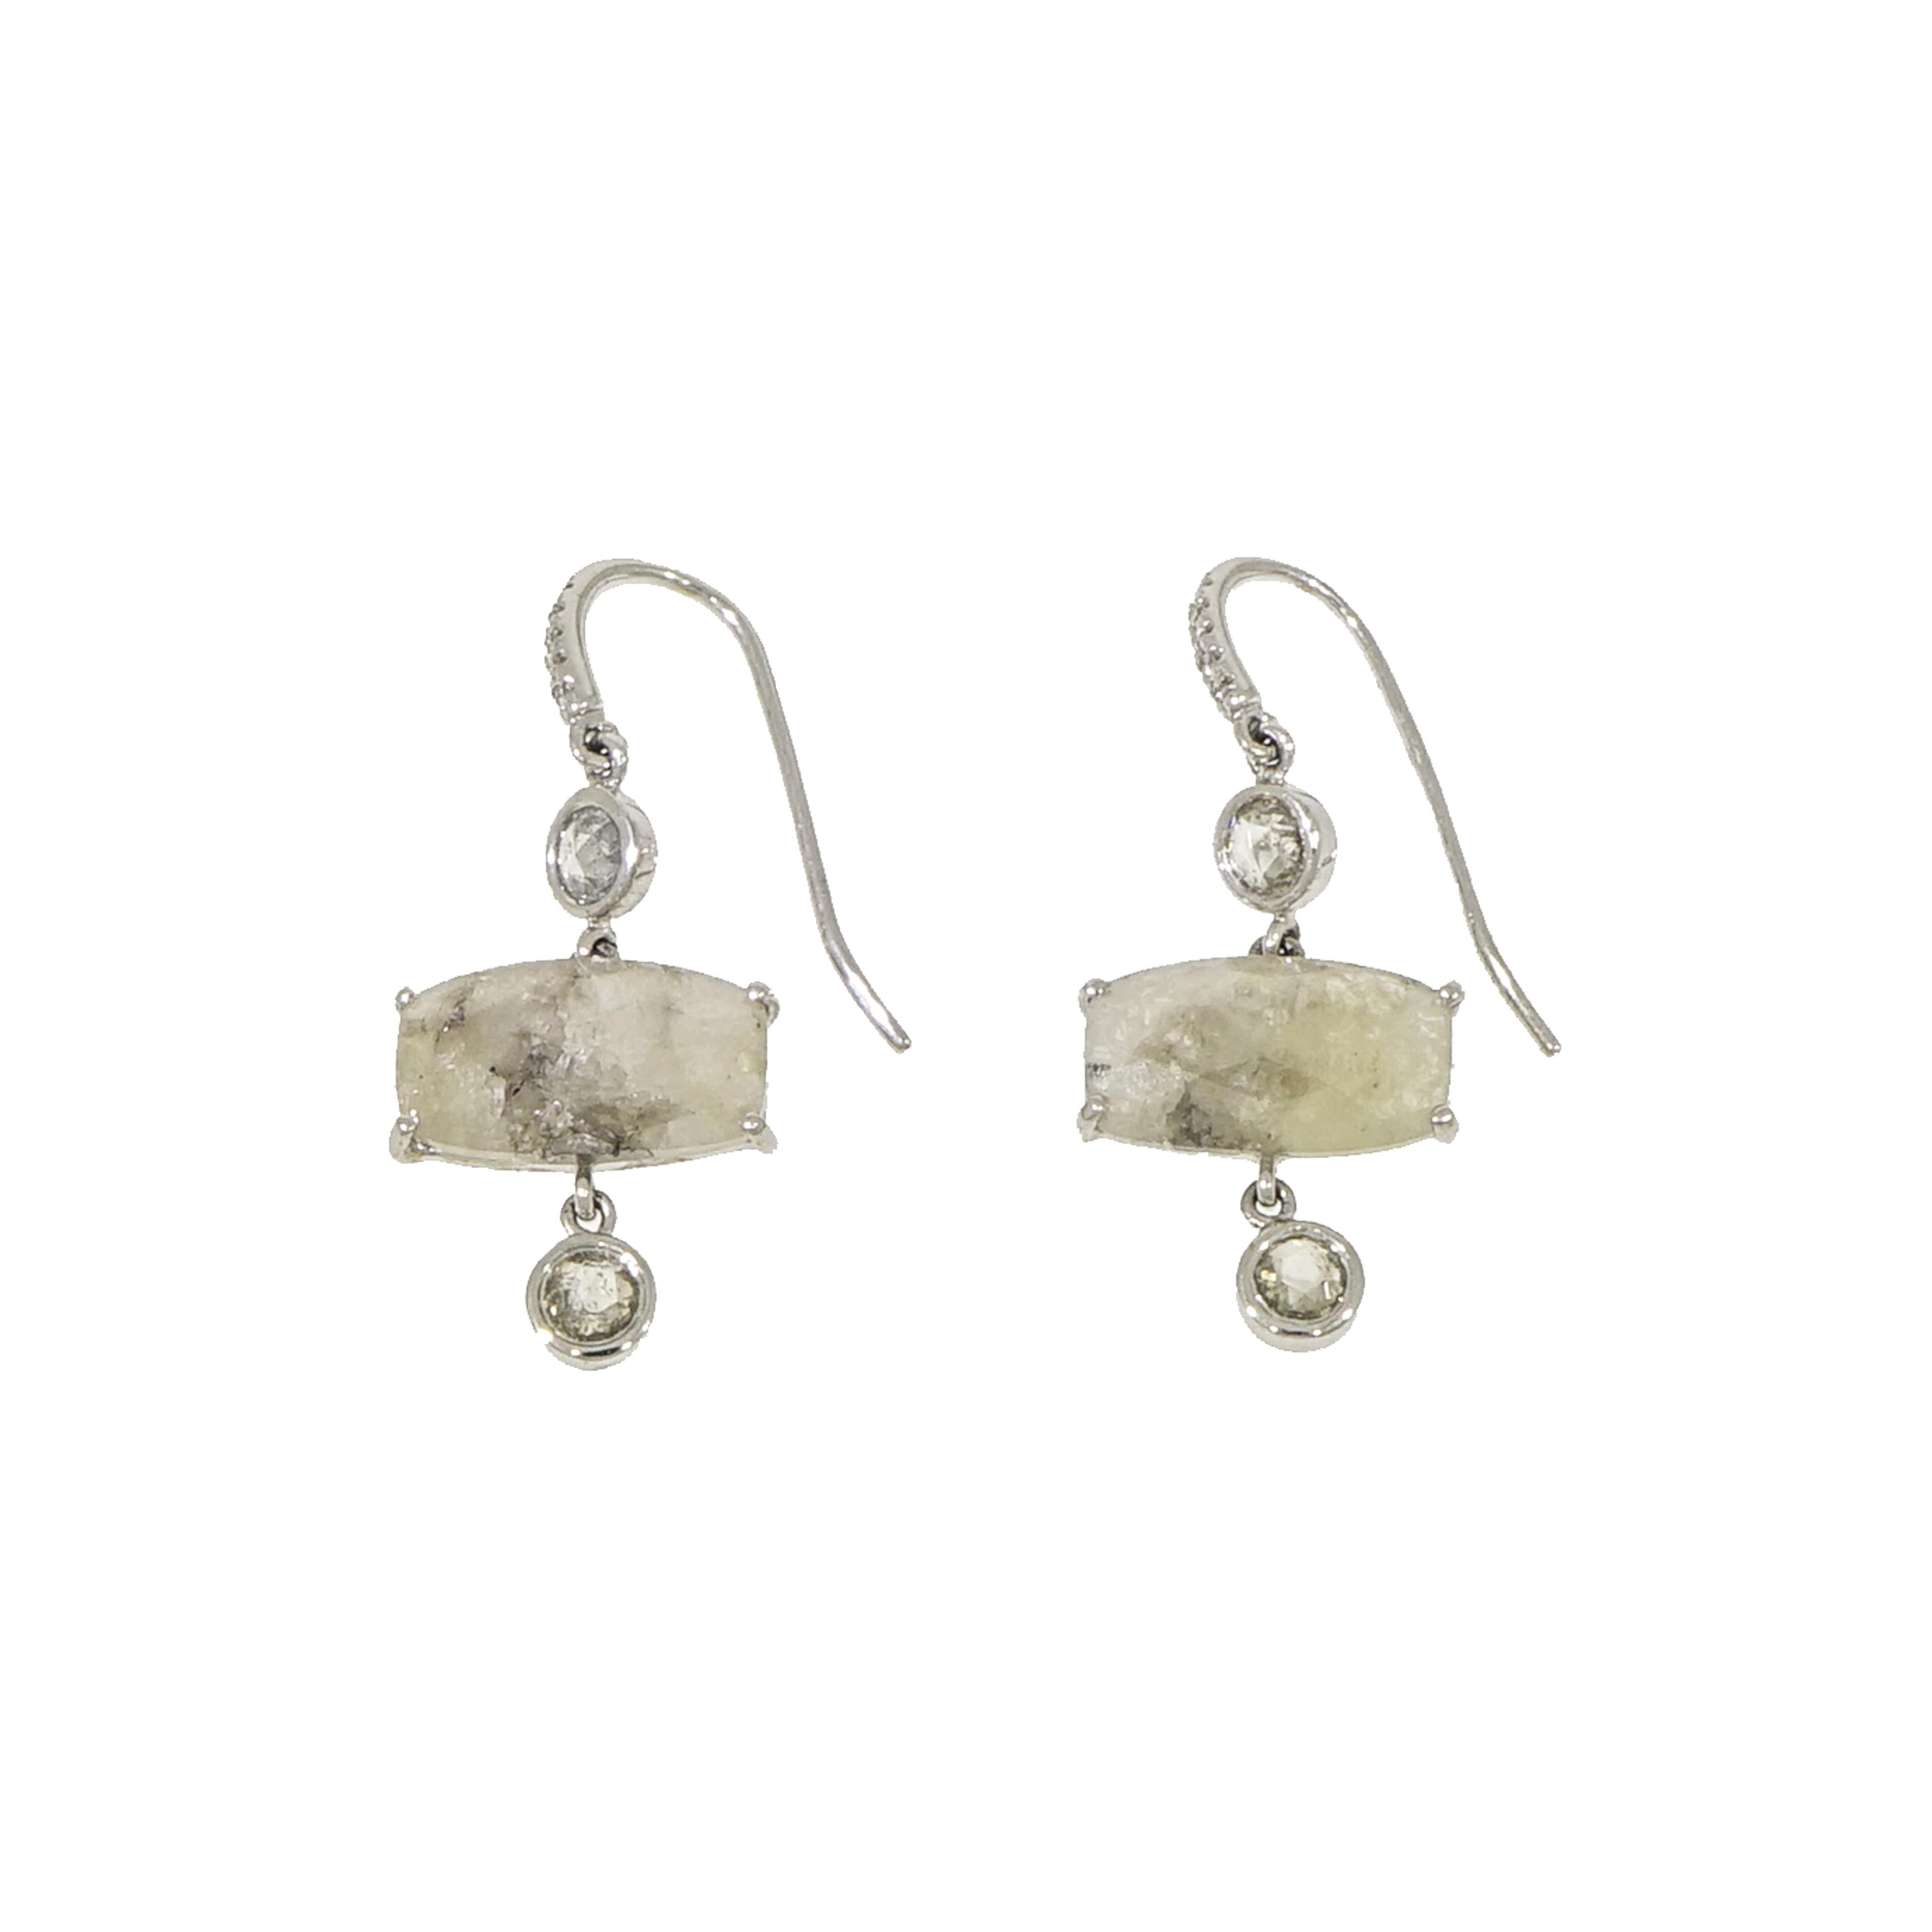 A subtle but impactful drop earrings is a go-to. These earrings are sure to be a hit with both classic and trend-seeking stylish lady. 
Designed and crafted in NYC with a pair of 8.20 carats of Natural Silver Diamonds and complimented by a 0.90